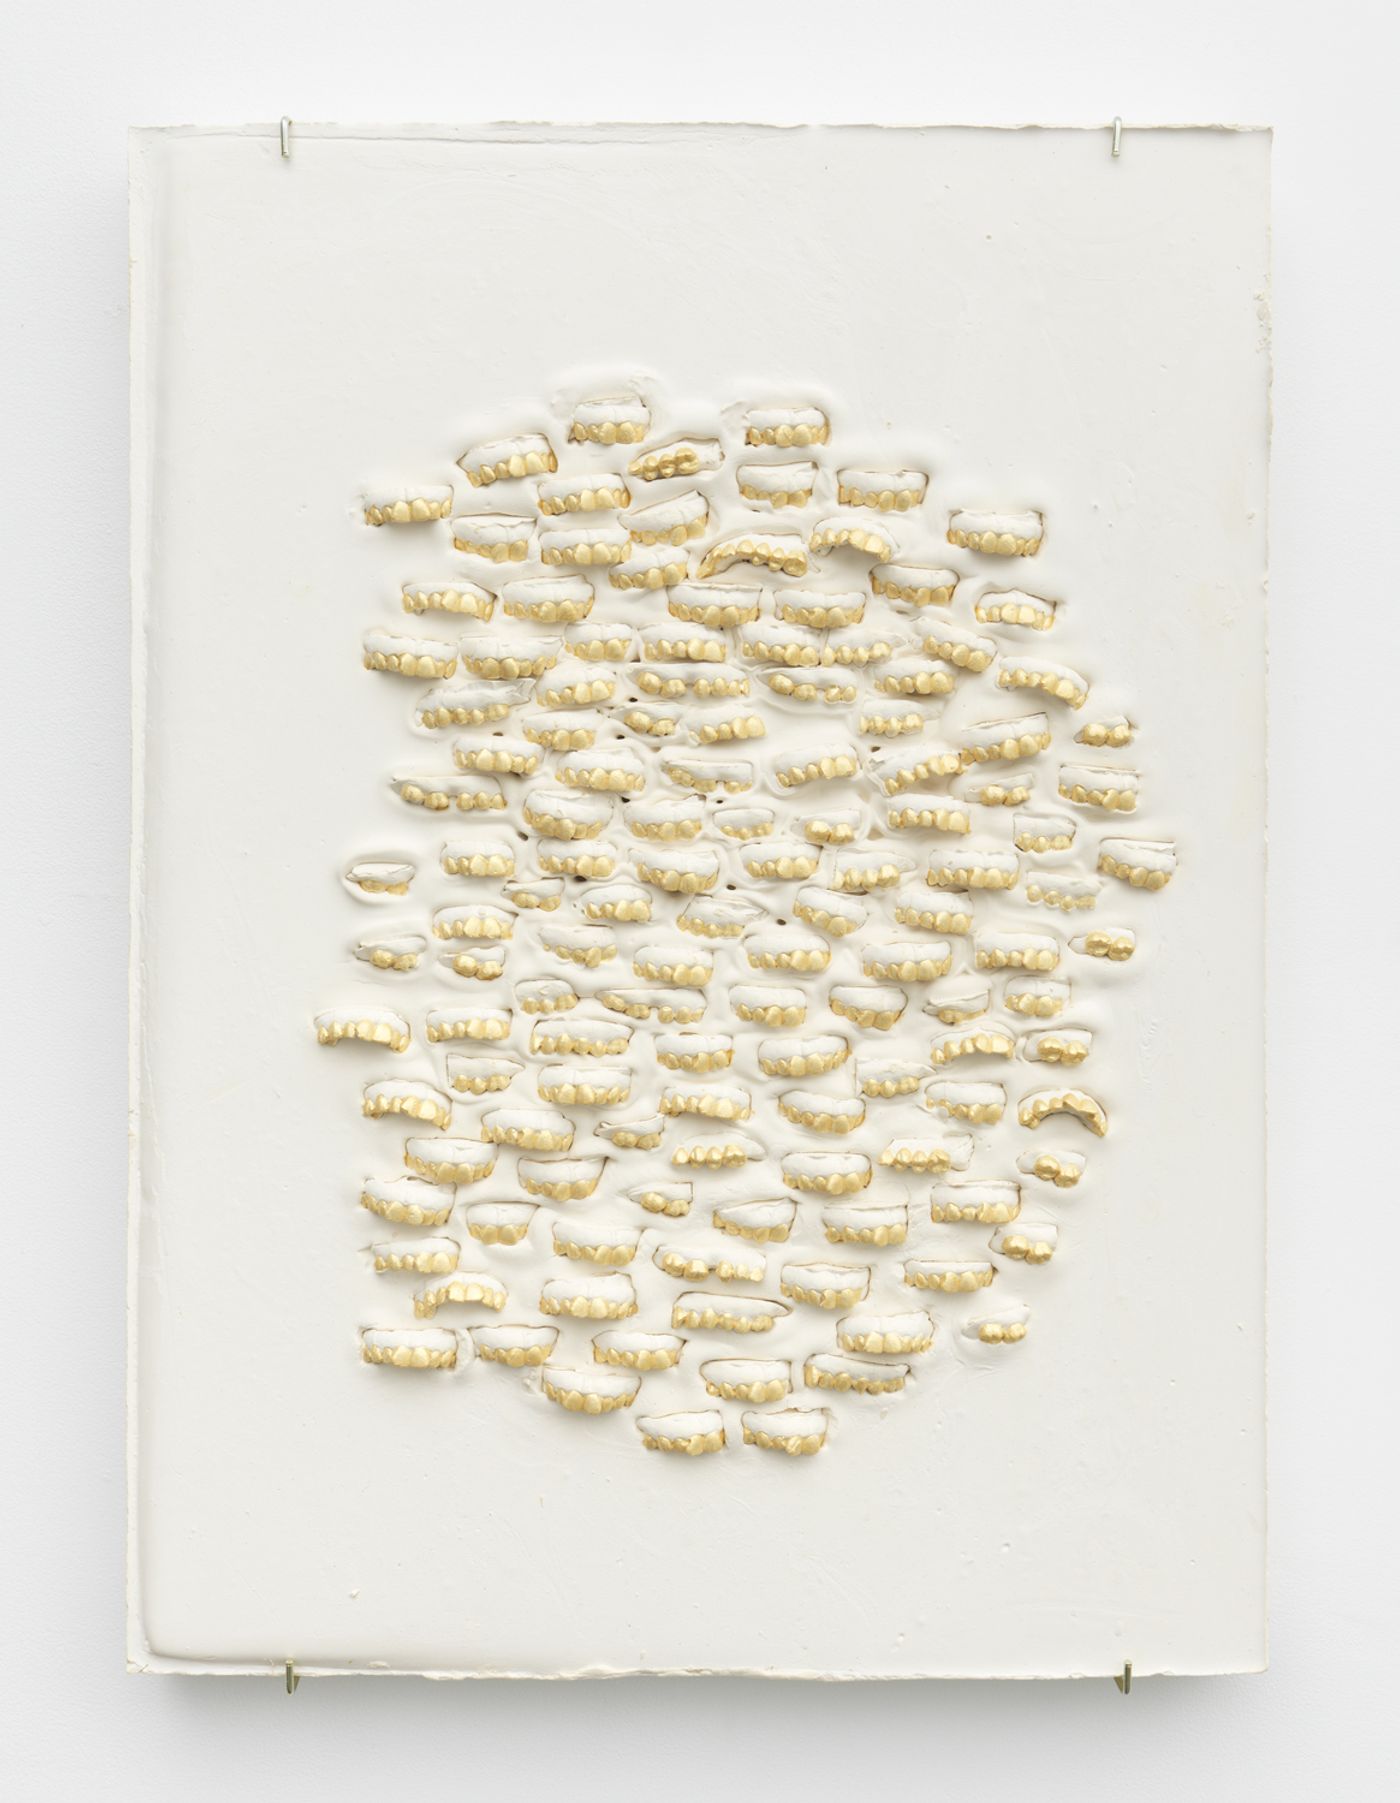 Image of Composition with Gold Teeth, 2019: Plaster, foam, and acrylic